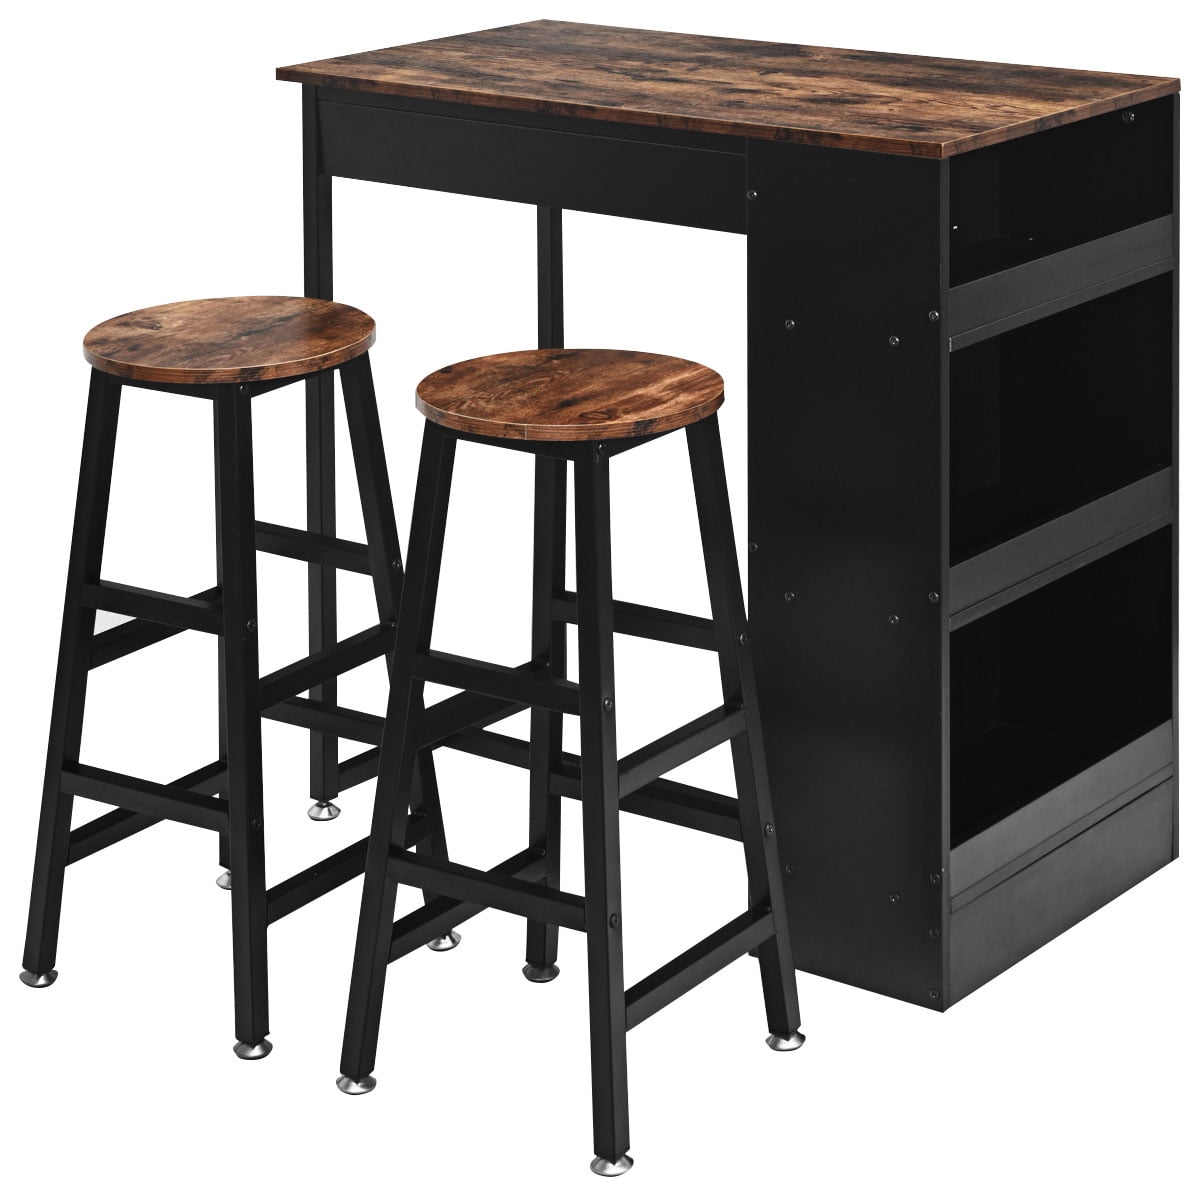 Liquor Rack Counter Height 3-piece Bar Dining Table Set with 2 Upholstered Bar Stools Chairs 4 Glass Holders 2 Wine Racks and 3 Open Storage Shelves 